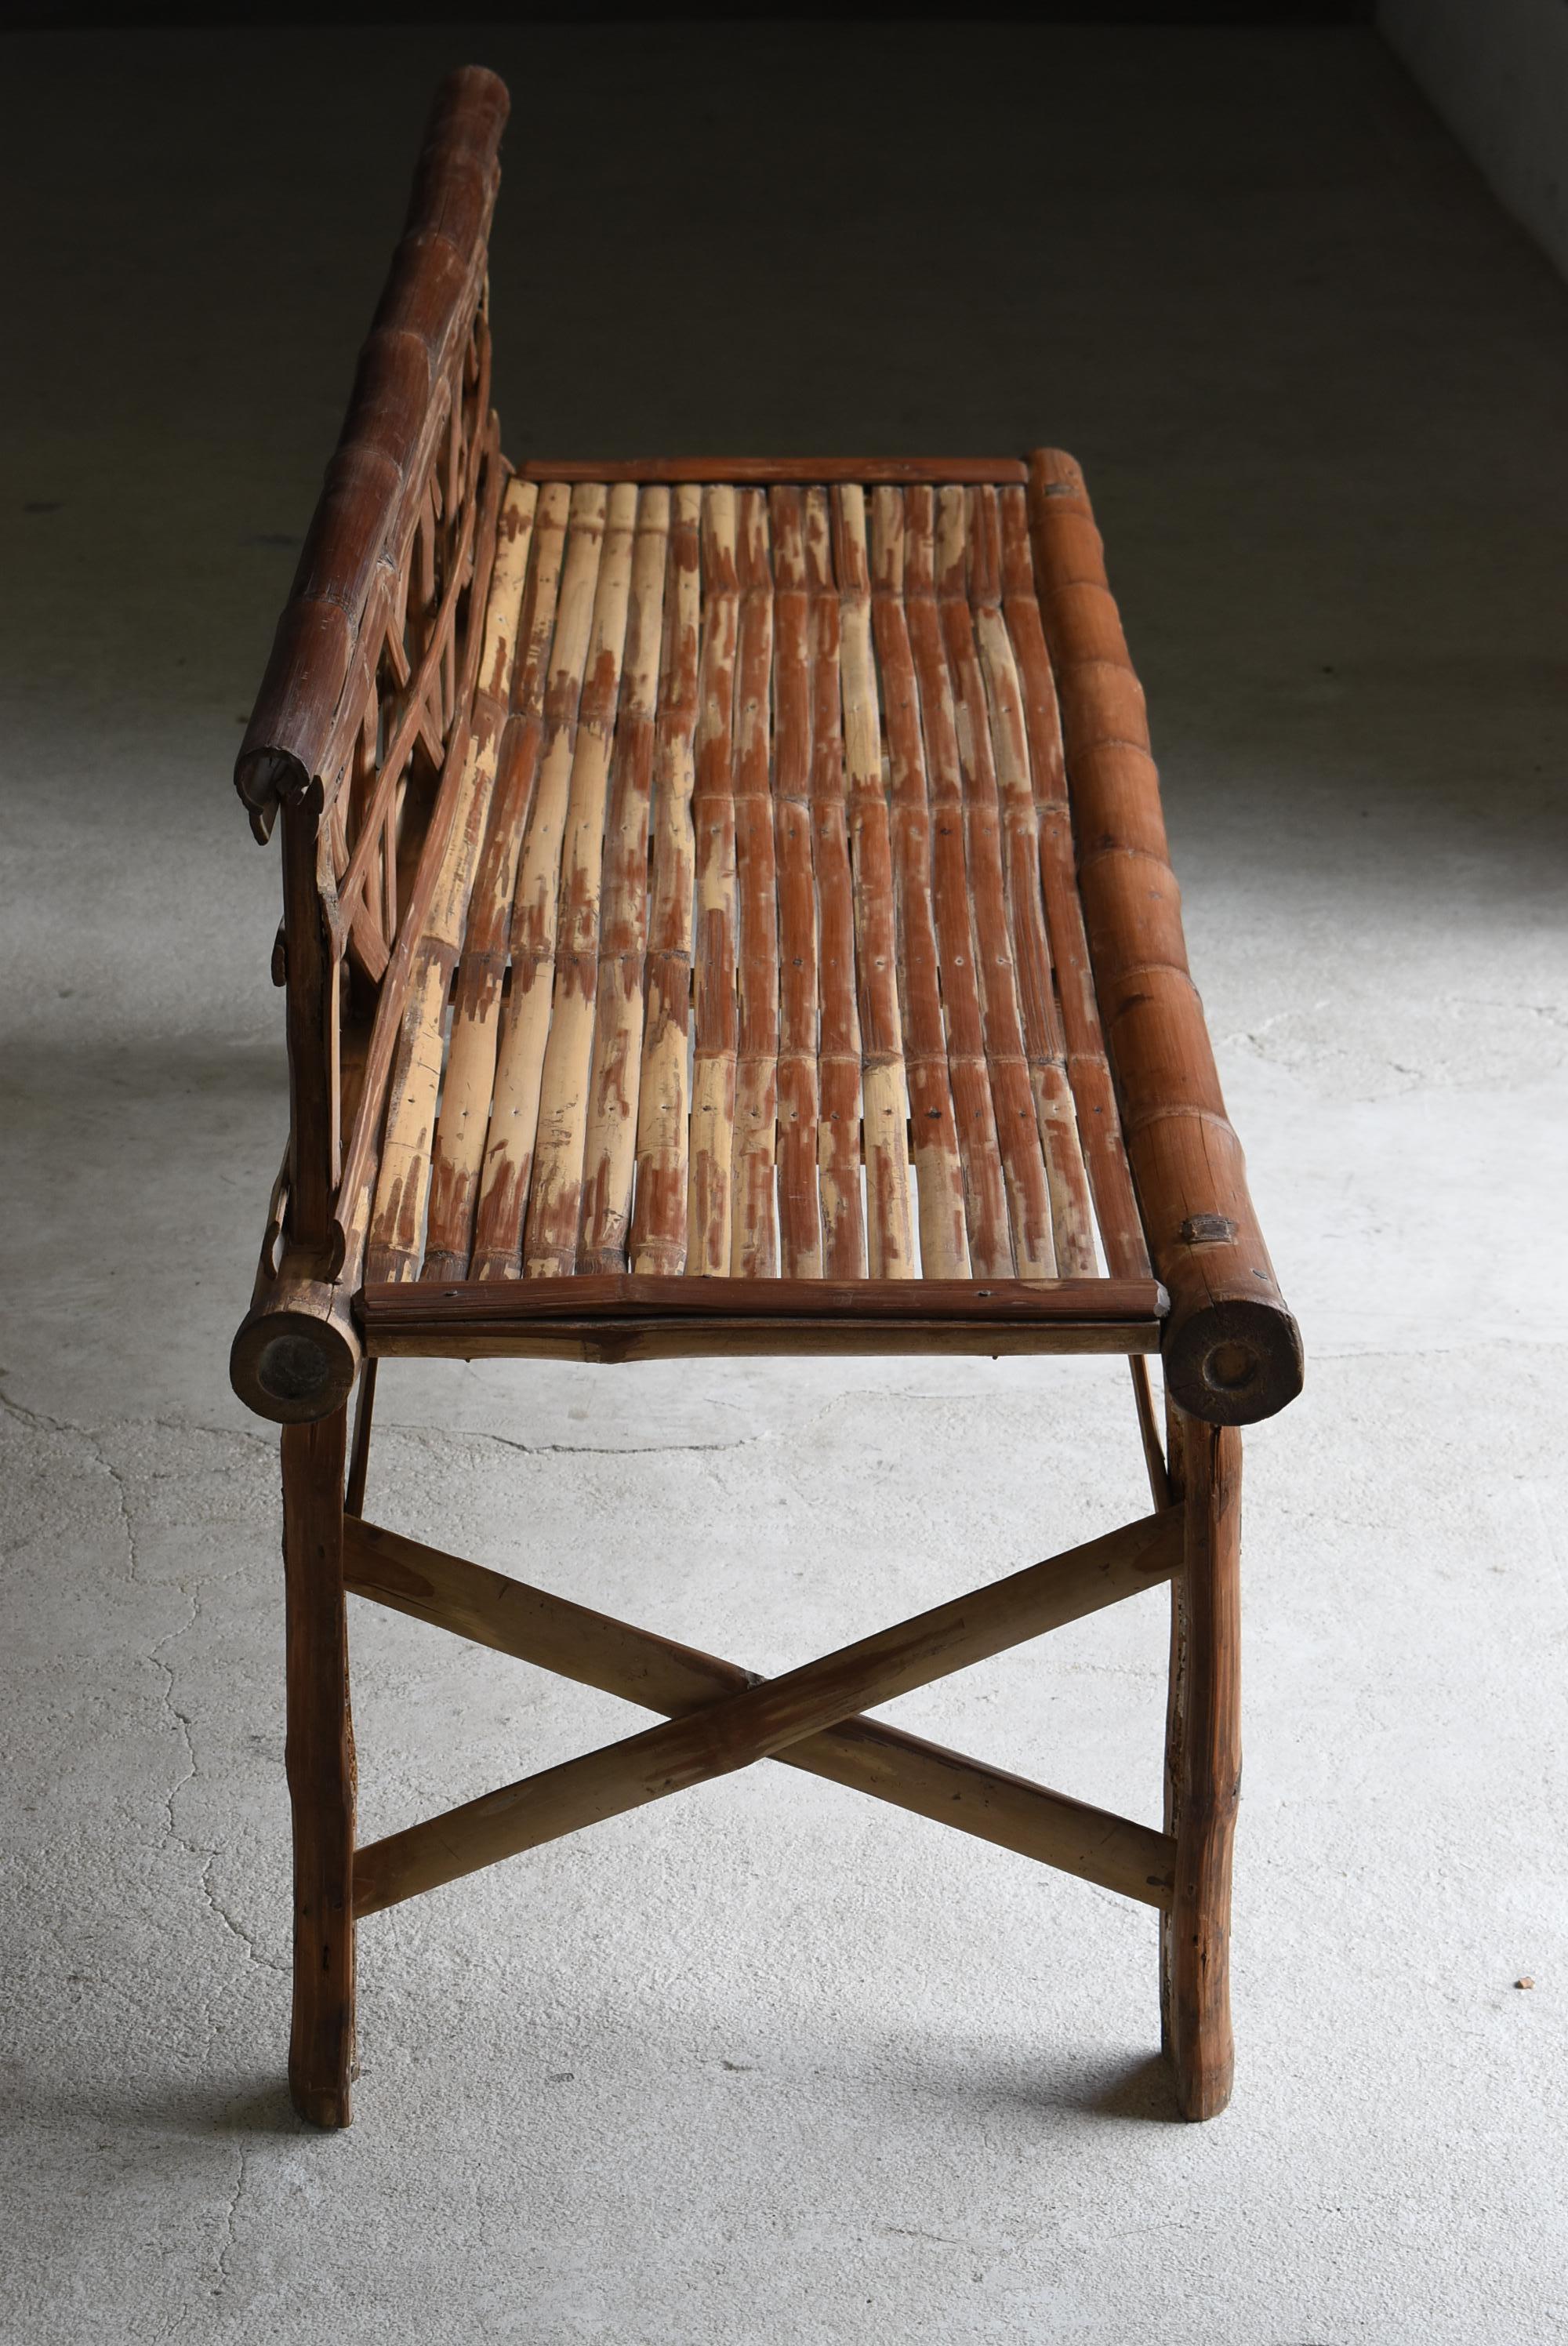 Japanese Old Bamboo Bench 1940s-1960s / Long Chair Mingei Wabisabi 9